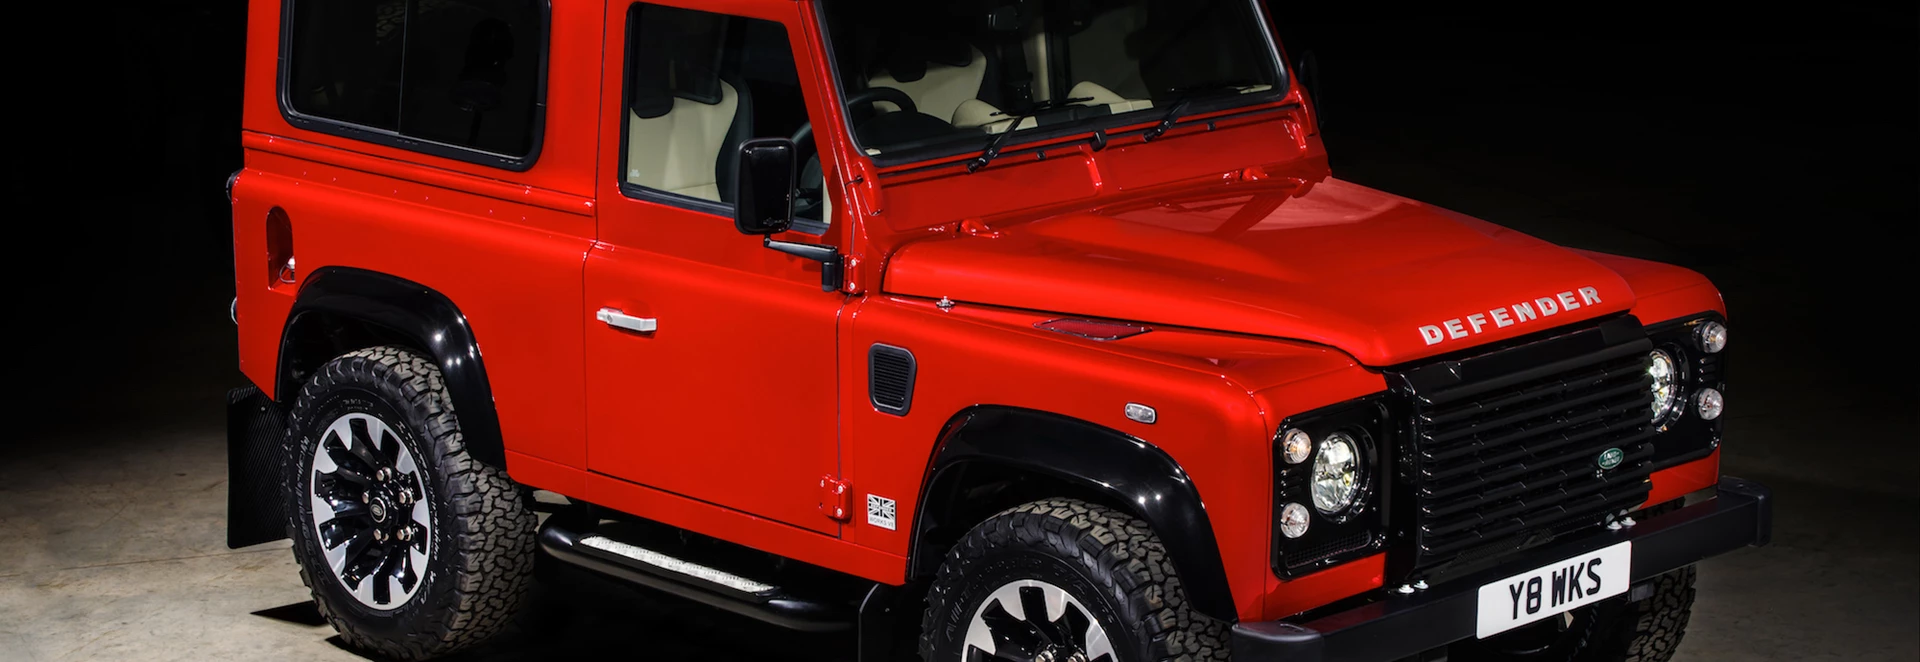 Six things you need to know about the £150,000 Land Rover Defender